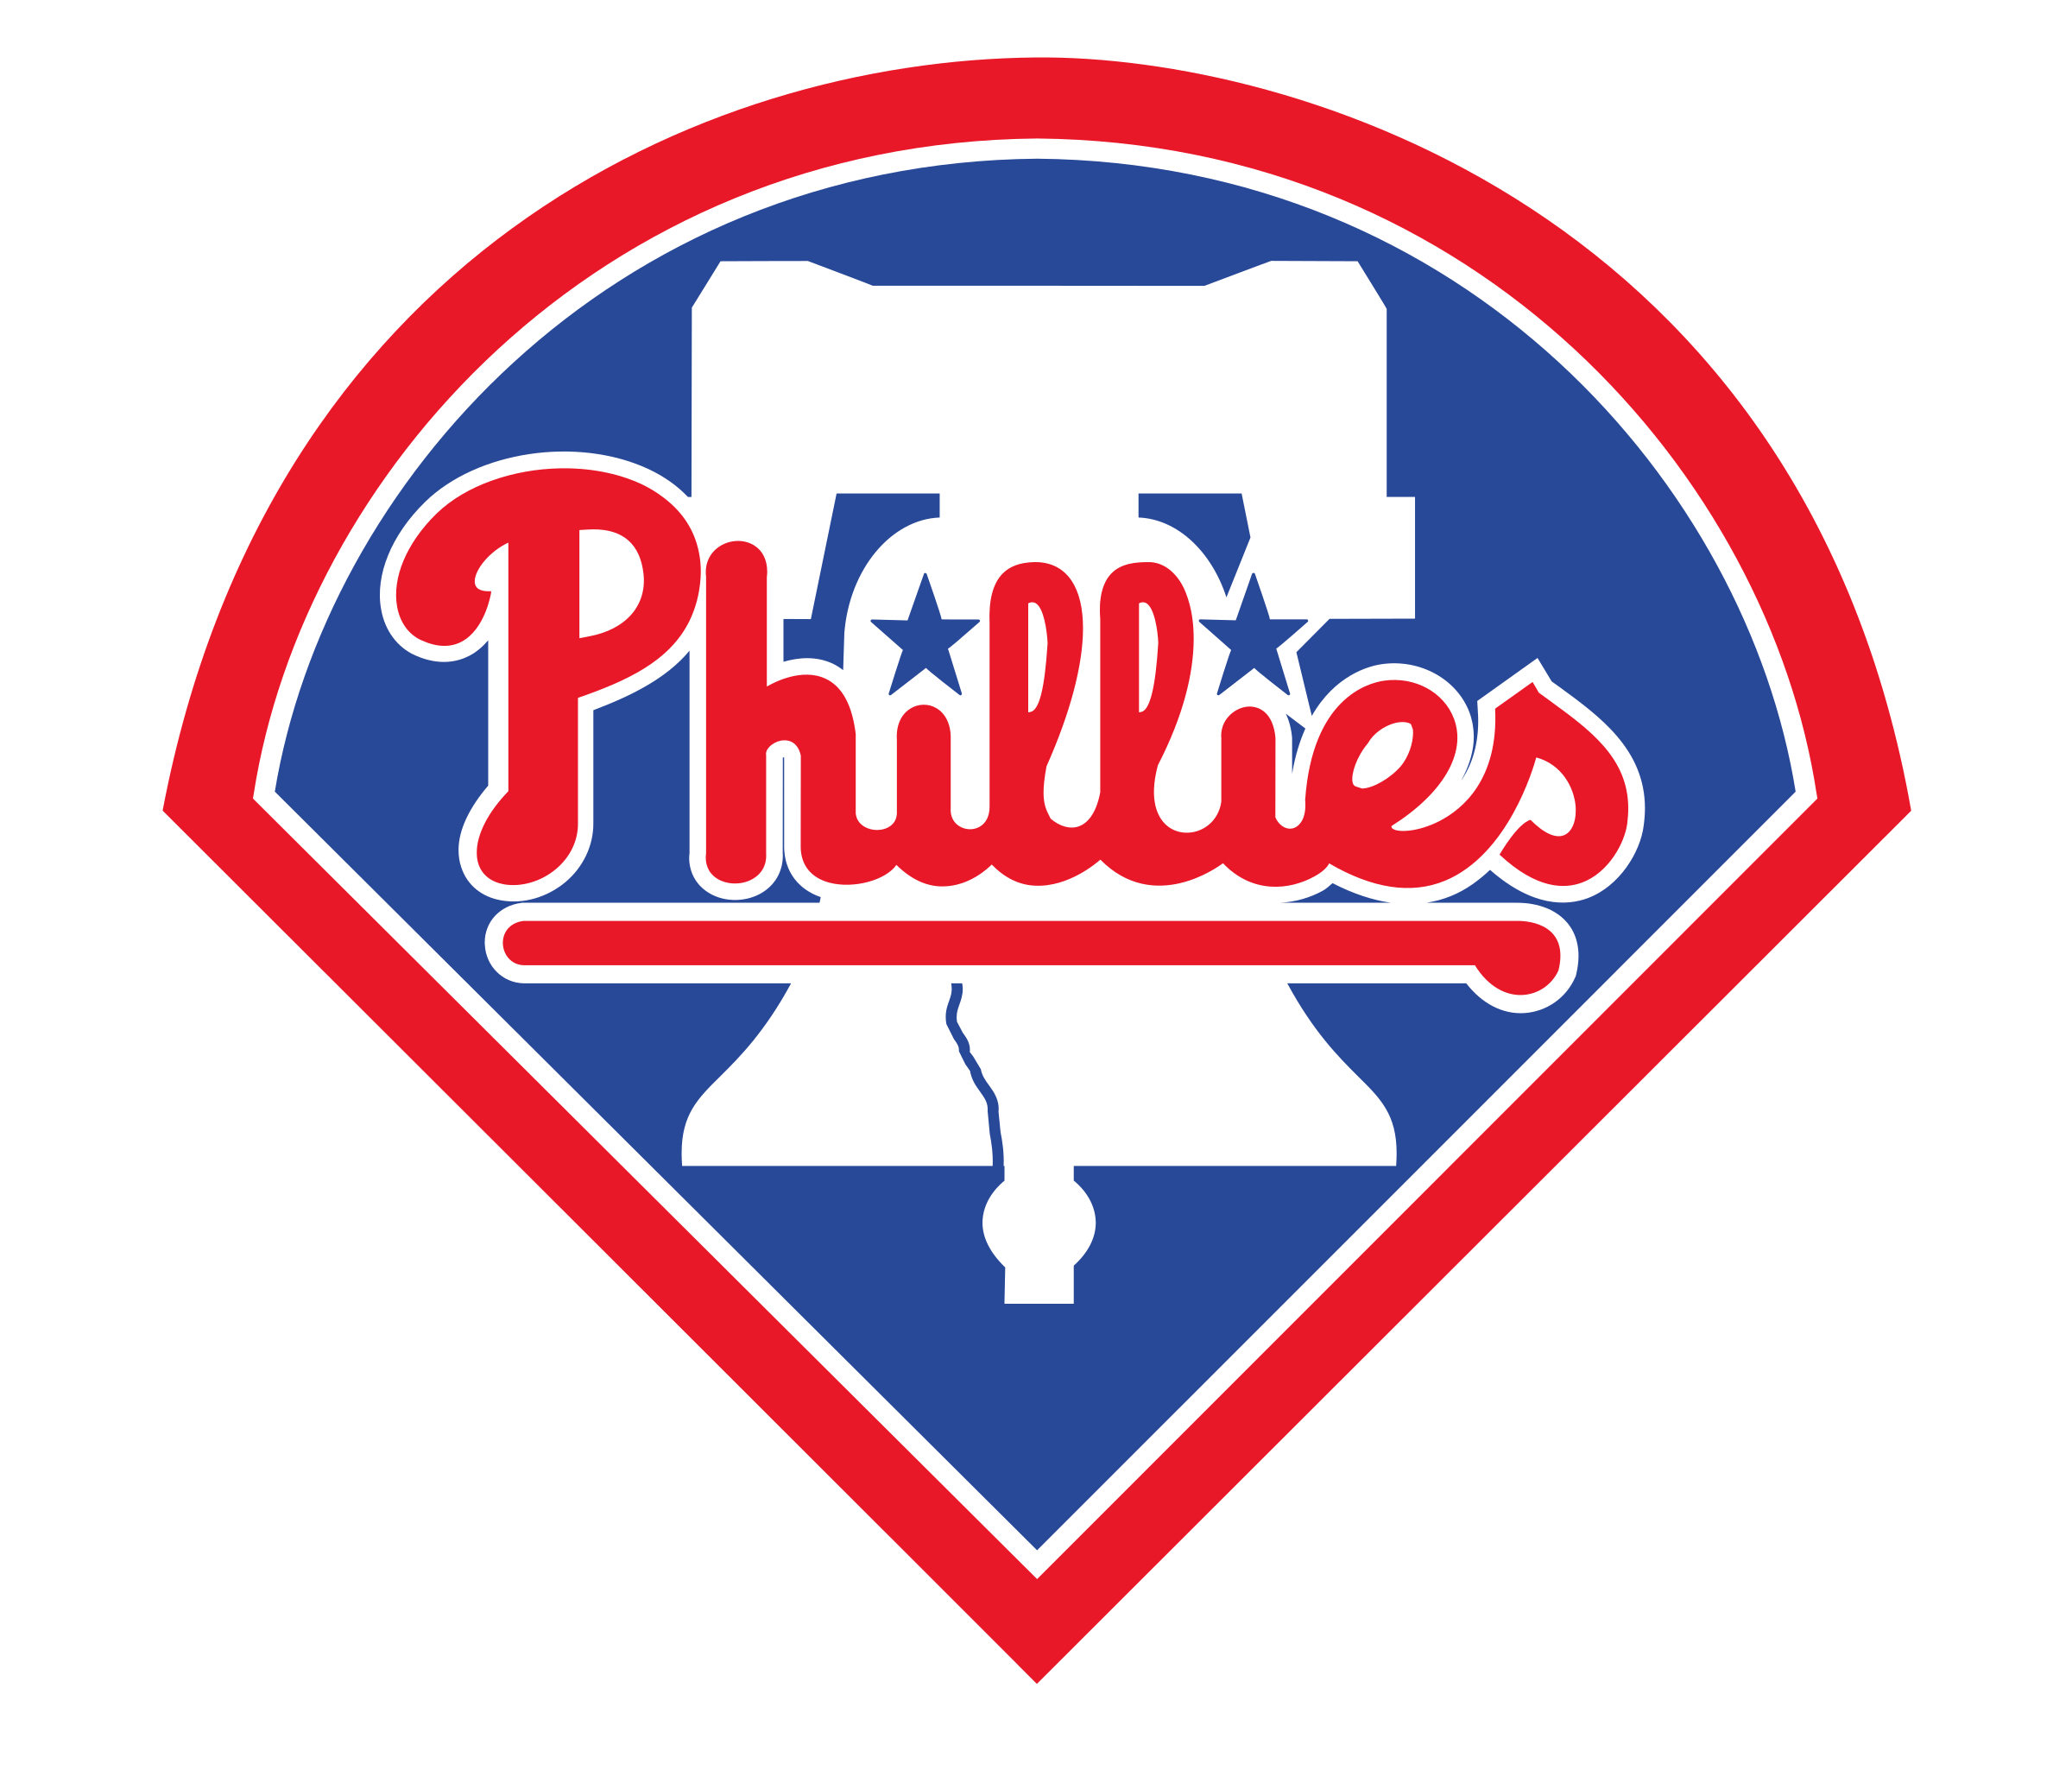 Phillies Logo PNG